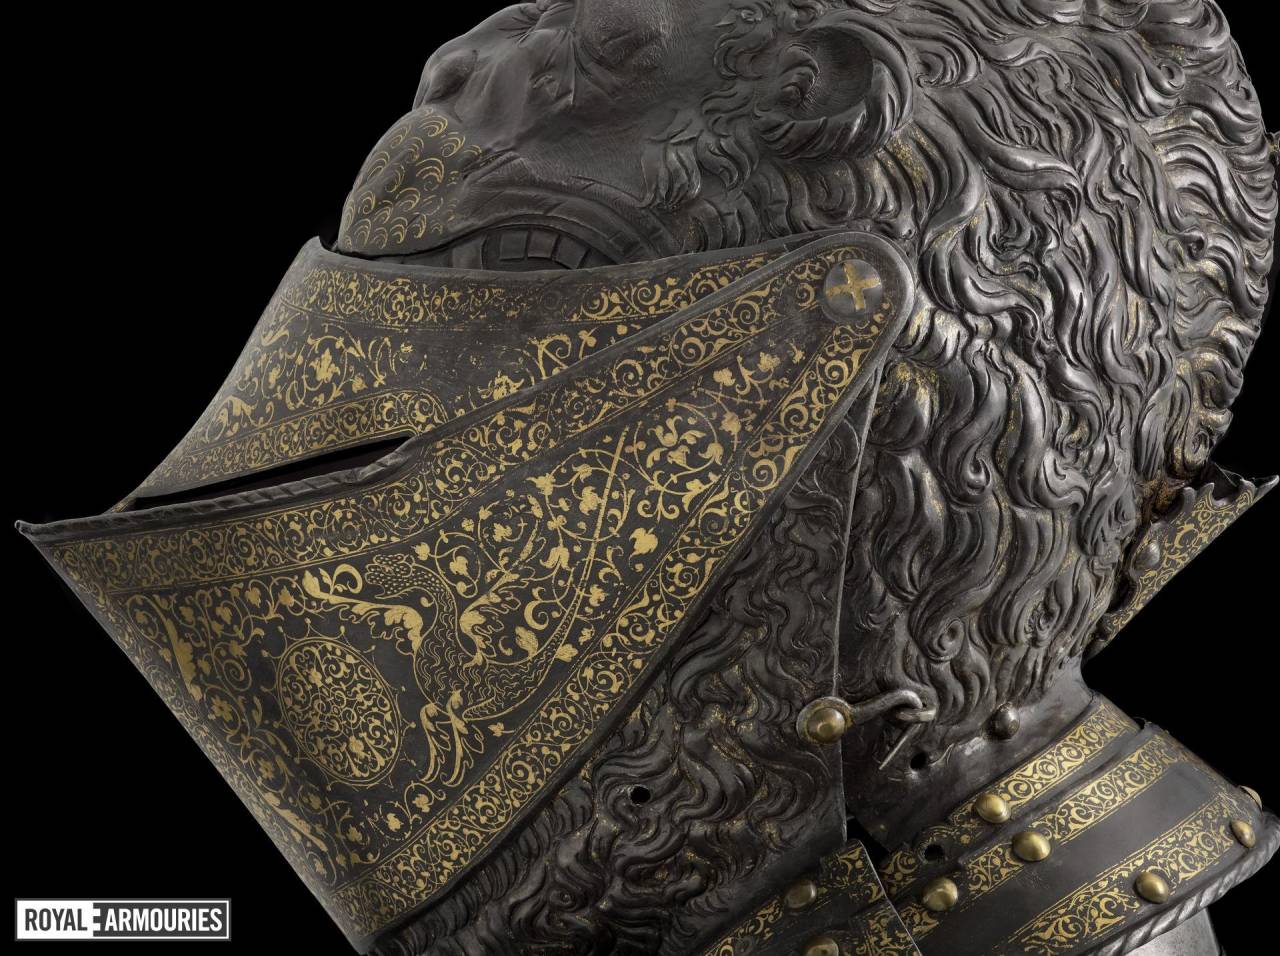 Share your favorite artifacts - So far mine is Alexander's Armor